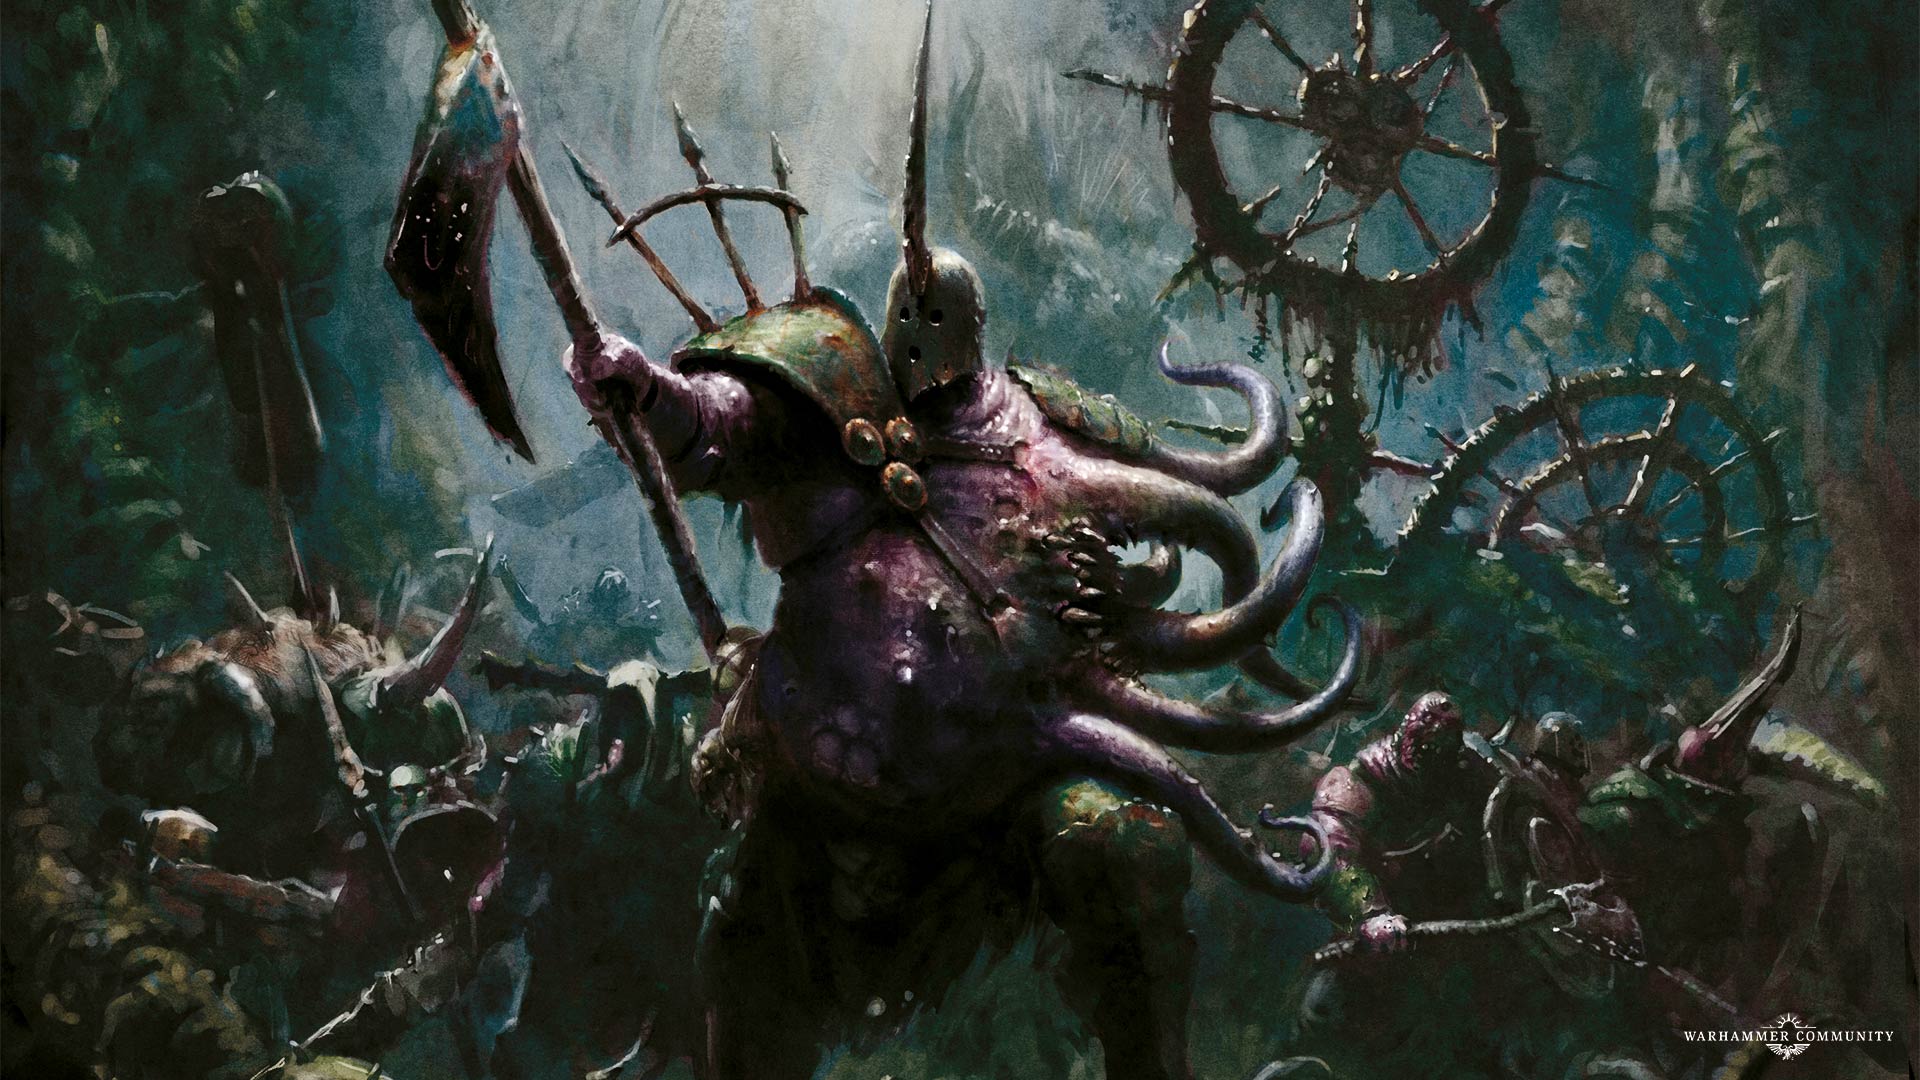 Faeit 212: Fourth Day of Nurgle: The Lord of Blights with New Wallpaper